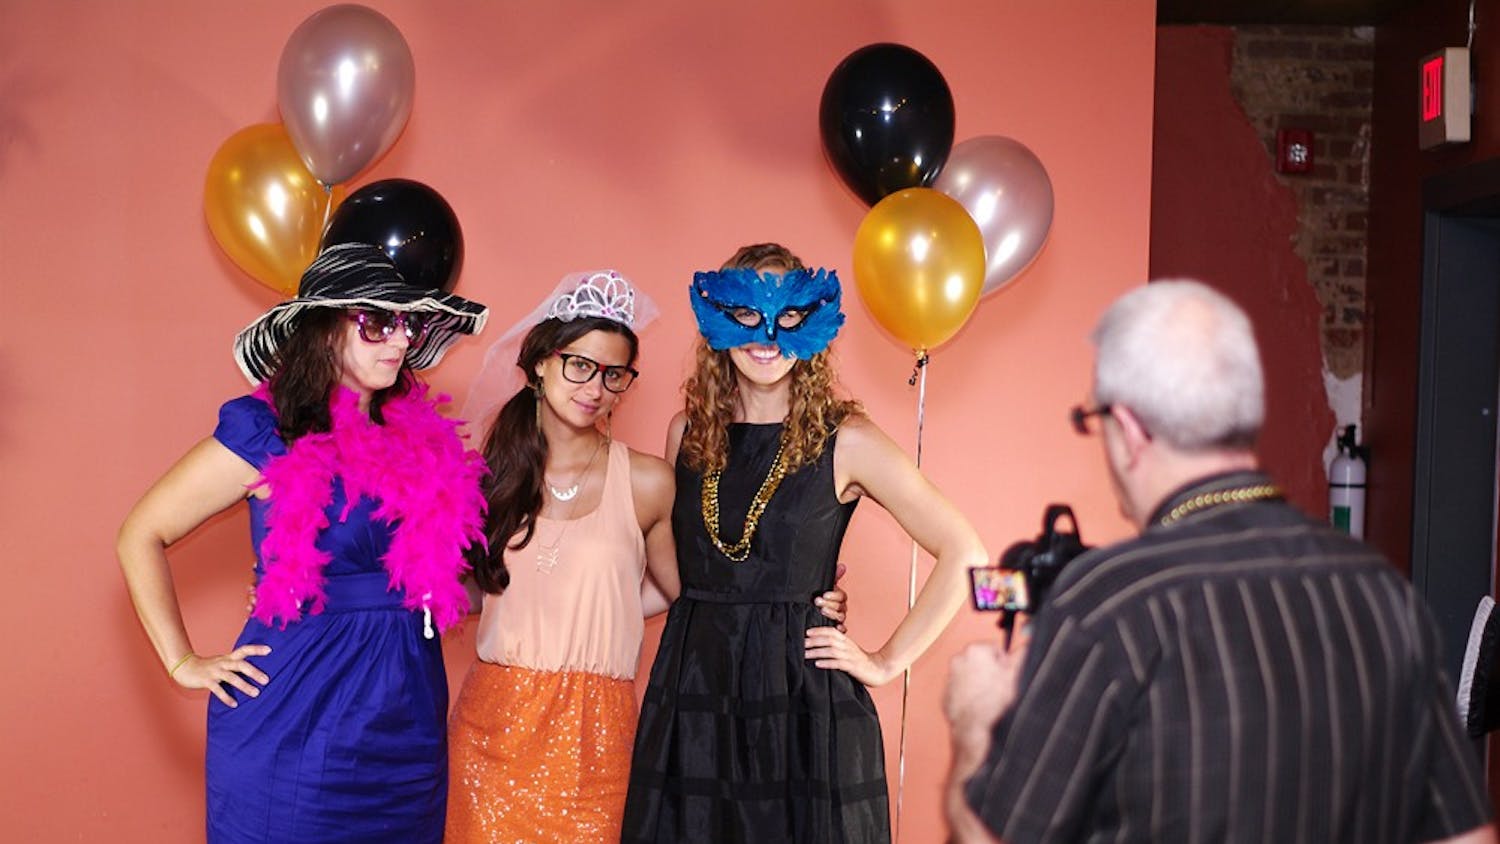 From left to right, Laura Houston, a UNC grad student from Long Island, NY, Claire Dennis, a therapist from Durham, and Colie Taico, the hostess of the event, from Chapel Hill, dress up for the photo booth at 2nd Chance Prom at Looking Glass Cafe on Saturday. 